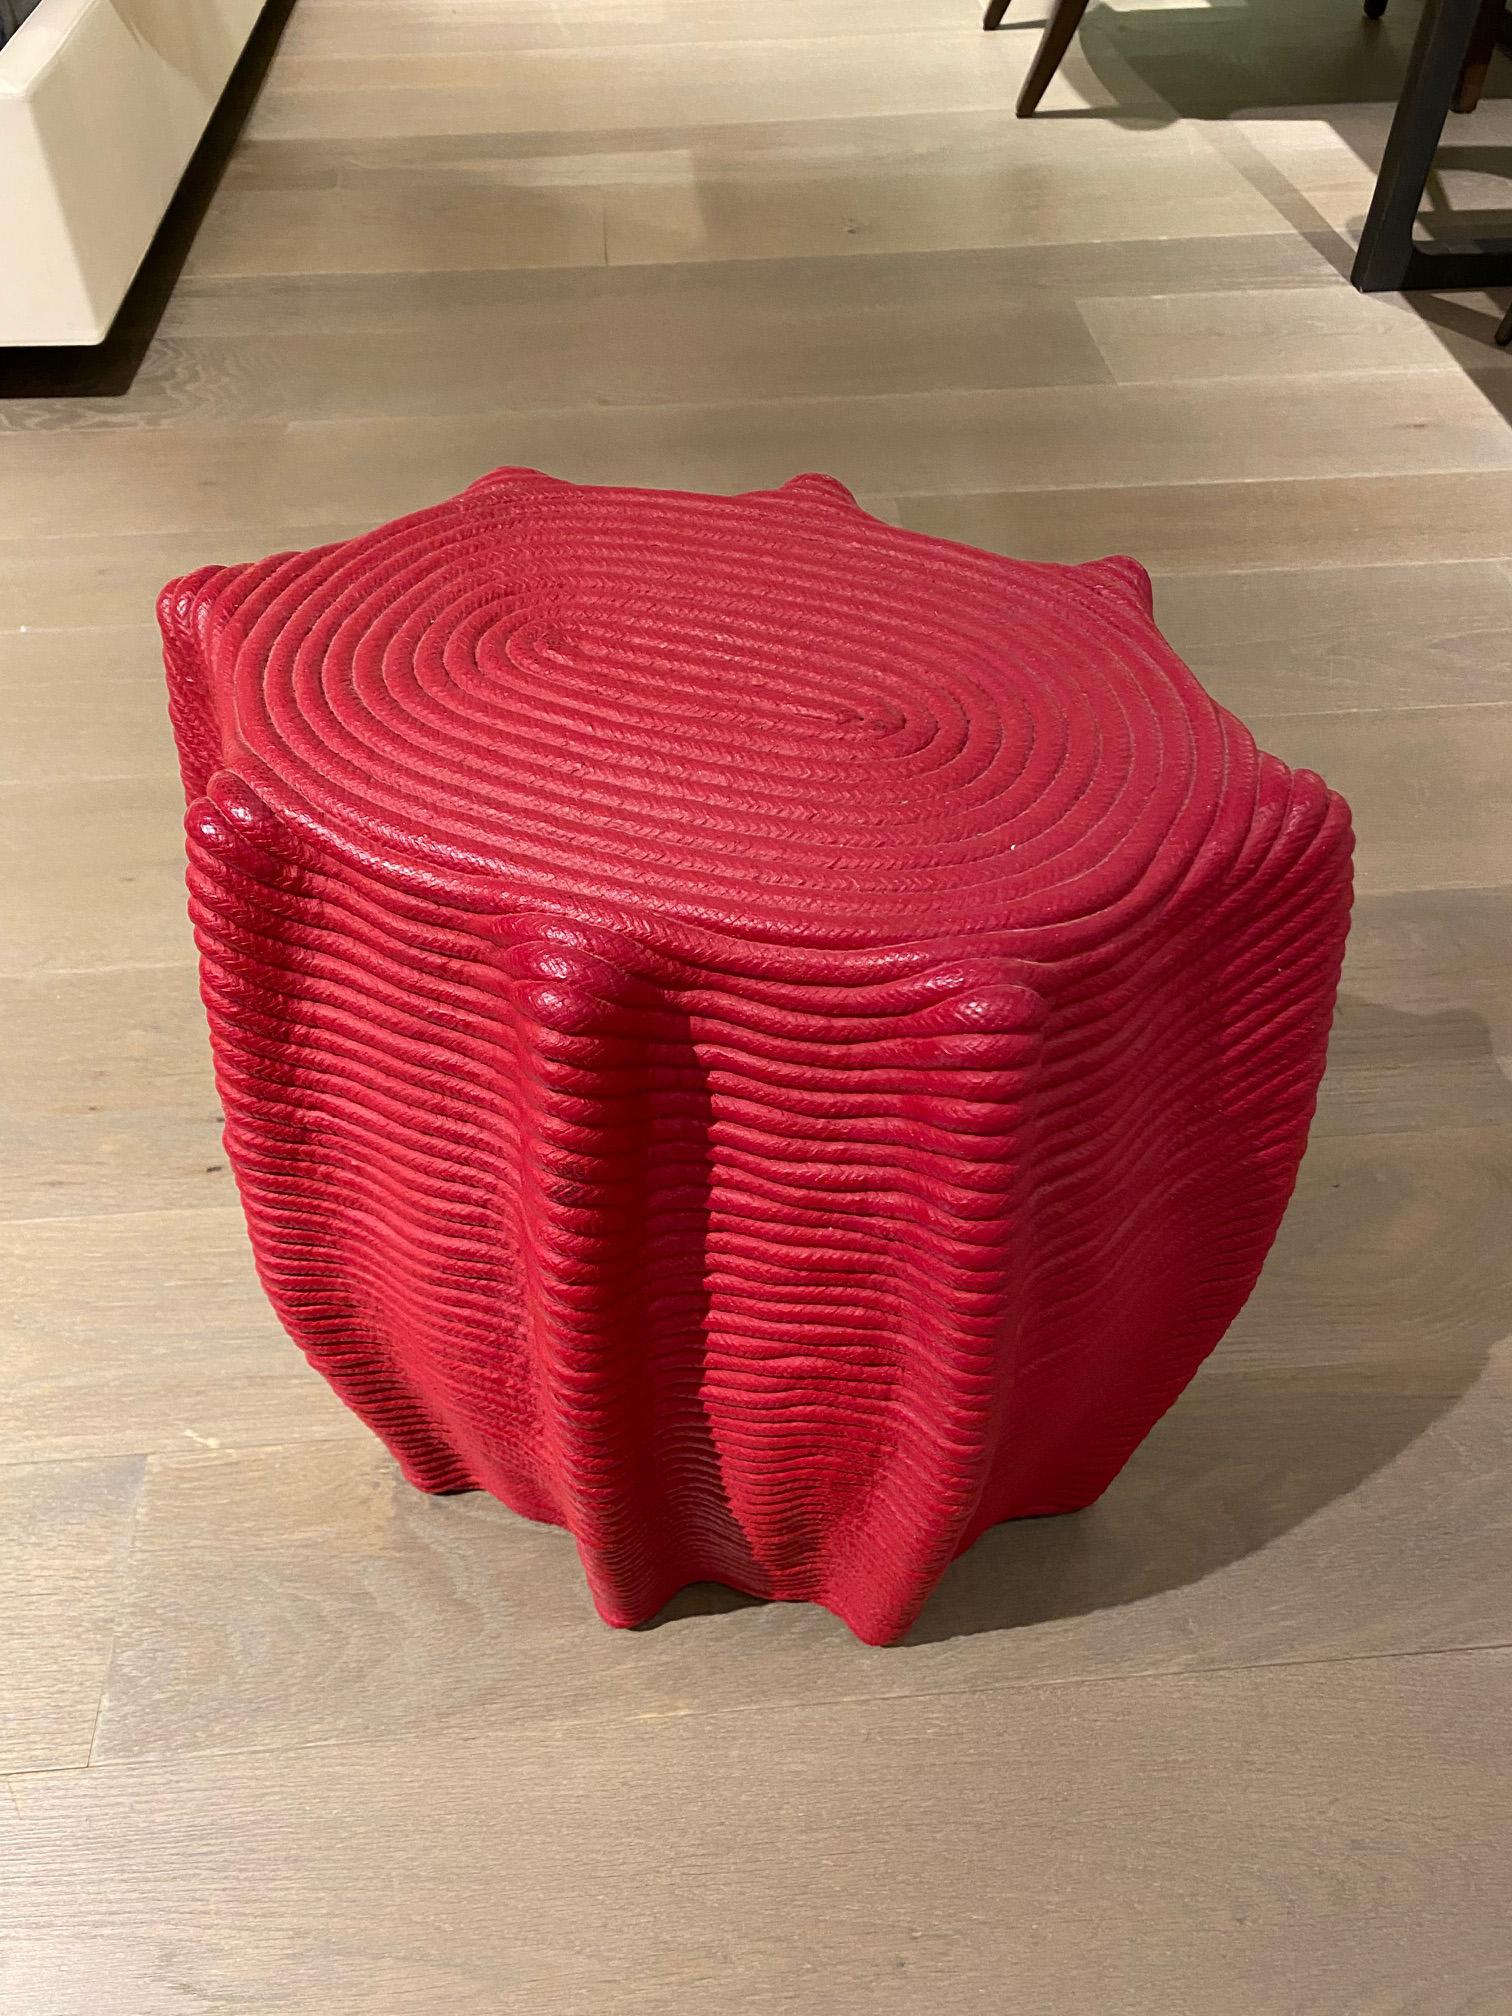 HOLLY HUNT Mivalo Stool in Carmin Red Cotton Cord by Christian Astuguevieille In Good Condition In Chicago, IL